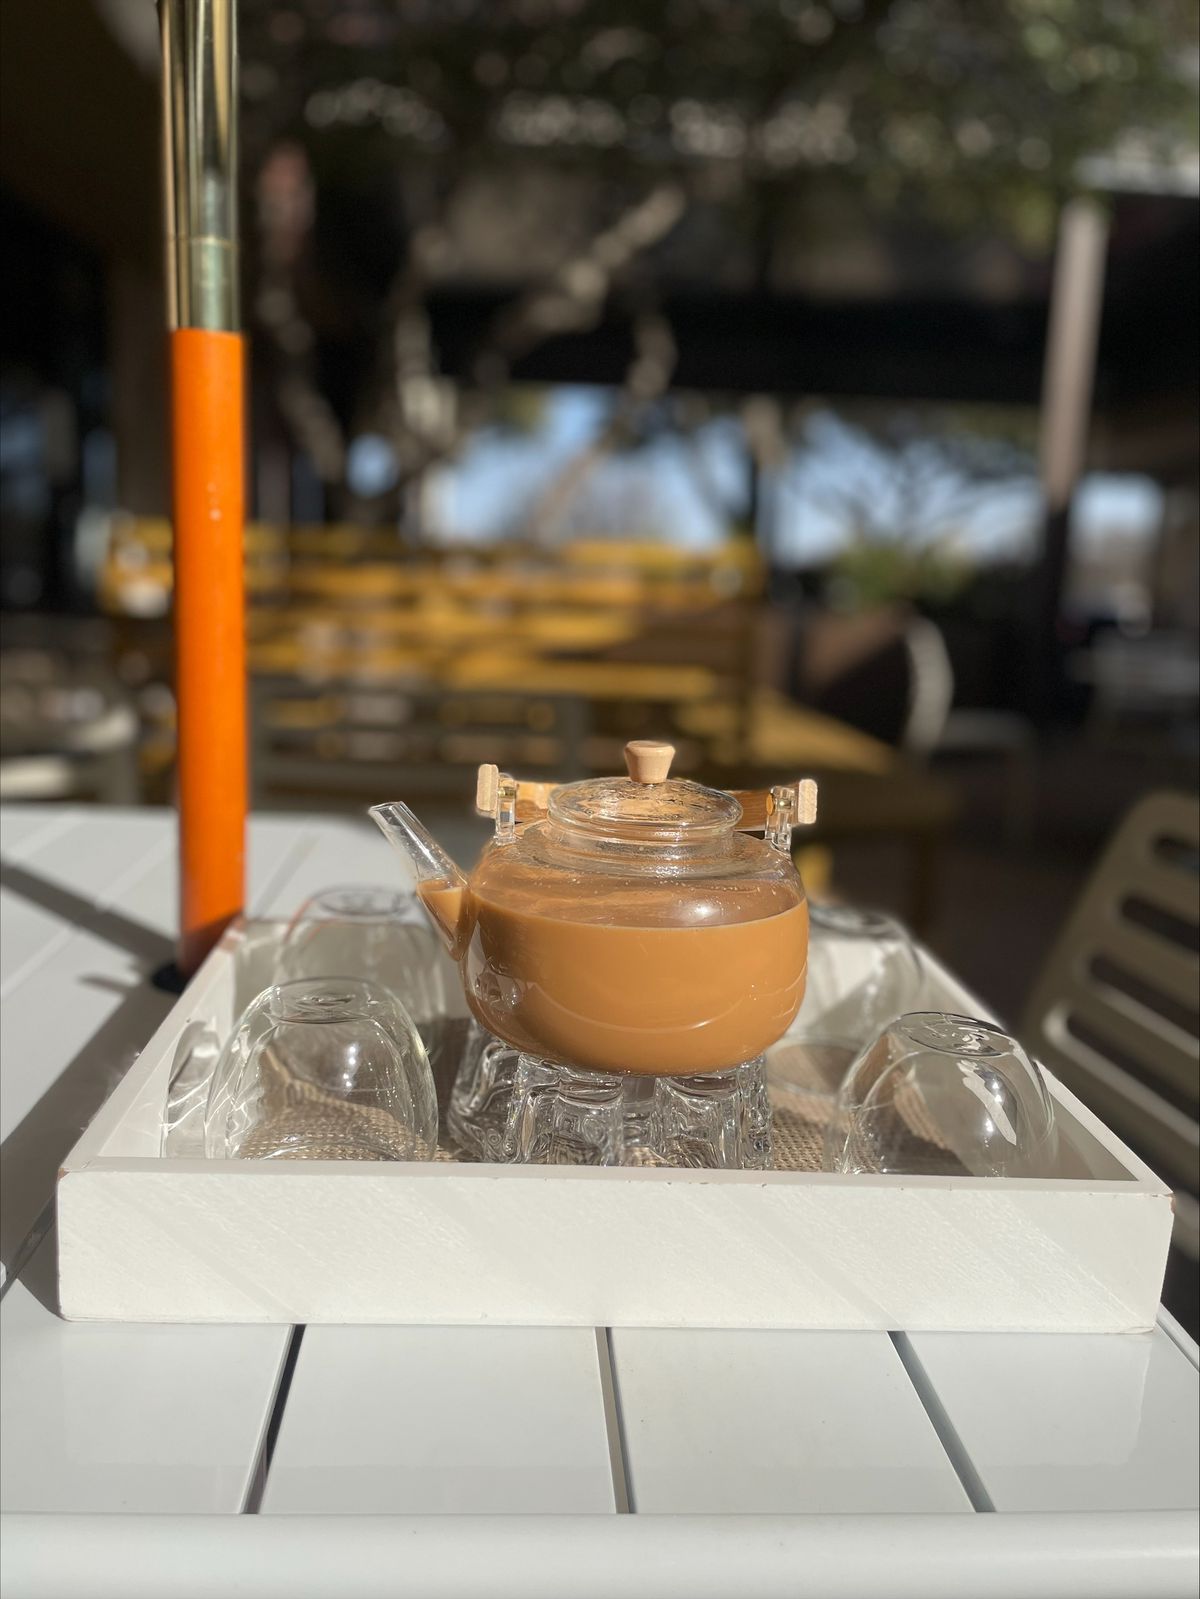 A glass coffee pot with light brown liquid sits on a tray on an outdoor table.